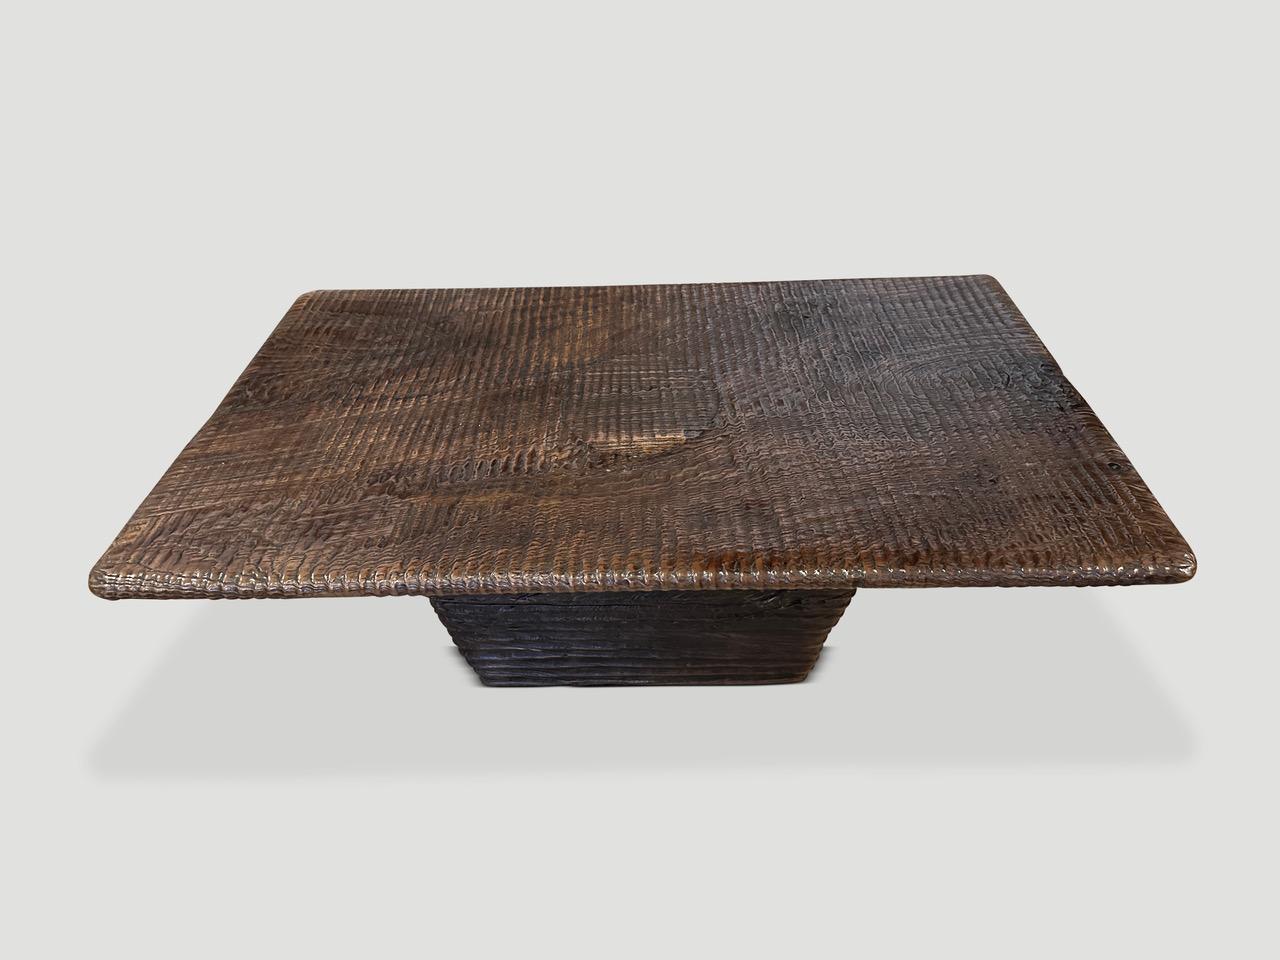 A century year old mortar originally used to grind rice is repurposed into this one of a kind coffee table. Carved from a single block of teak wood and featuring our unique minimalist carving to produce this impressive coffee table with a bevelled